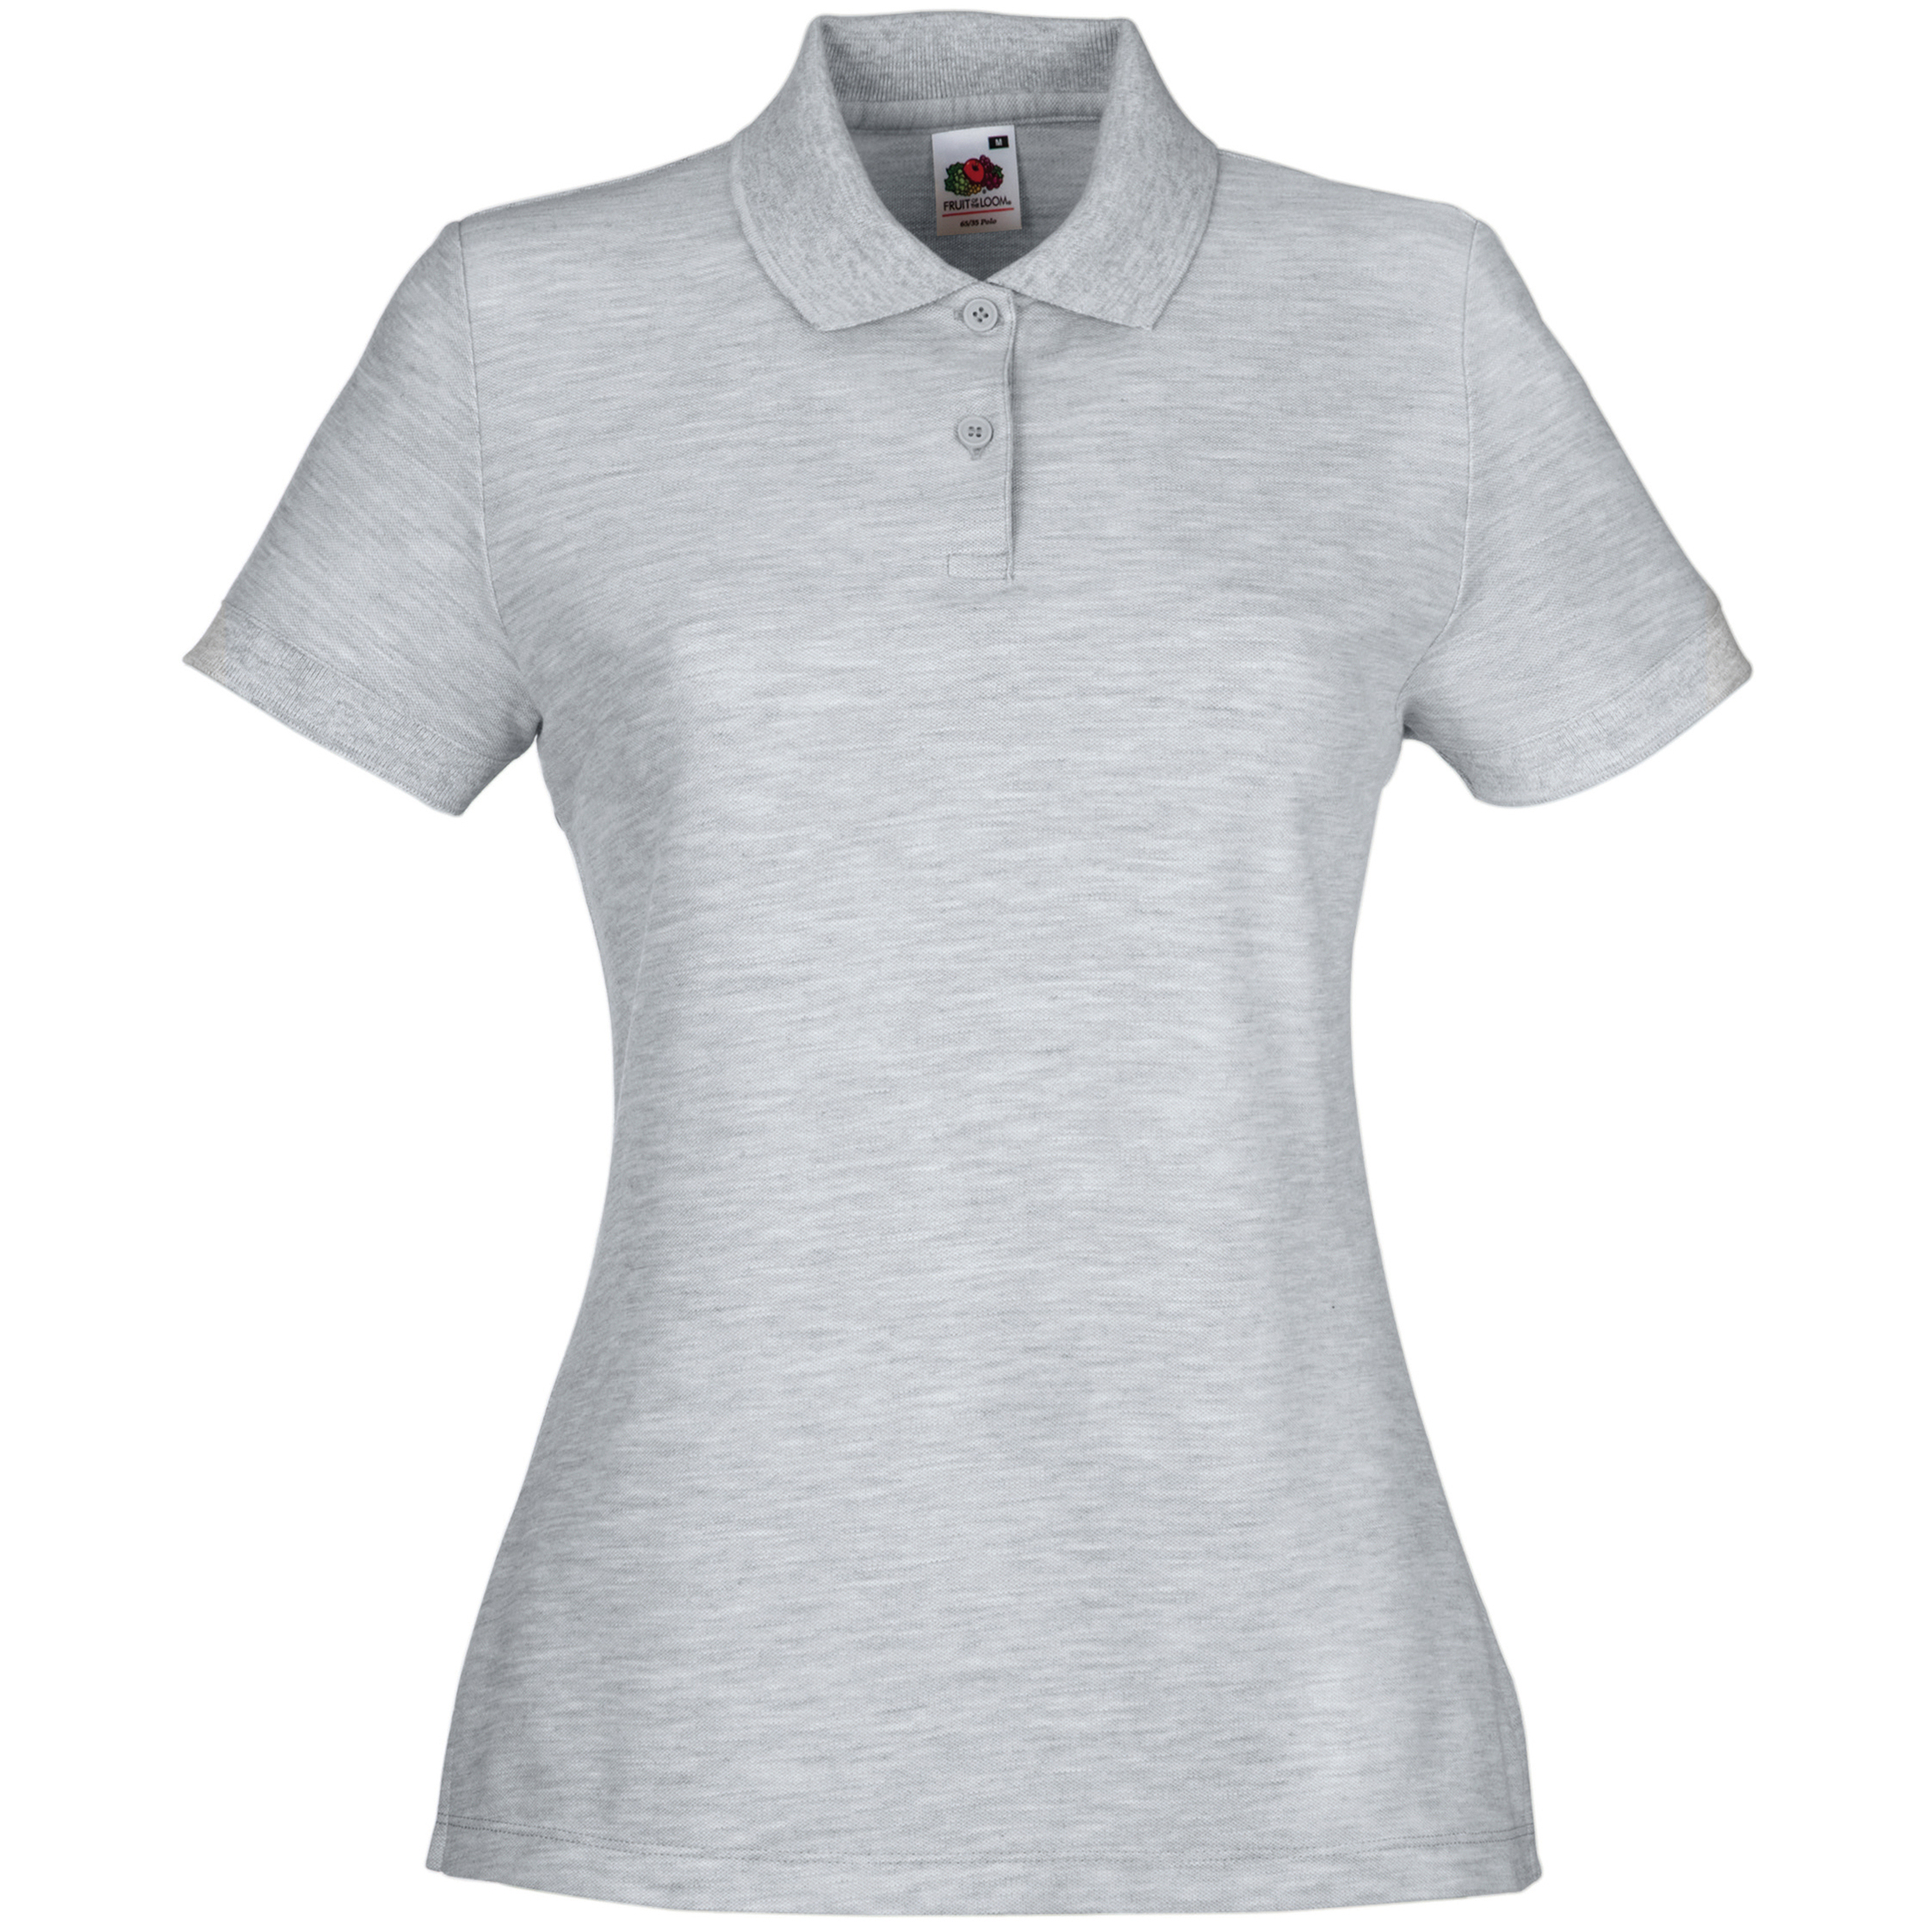 ax-httpswebsystems.s3.amazonaws.comtmp_for_downloadfruit-of-the-loom-ladies-65-35-polo-heather-grey.jpg